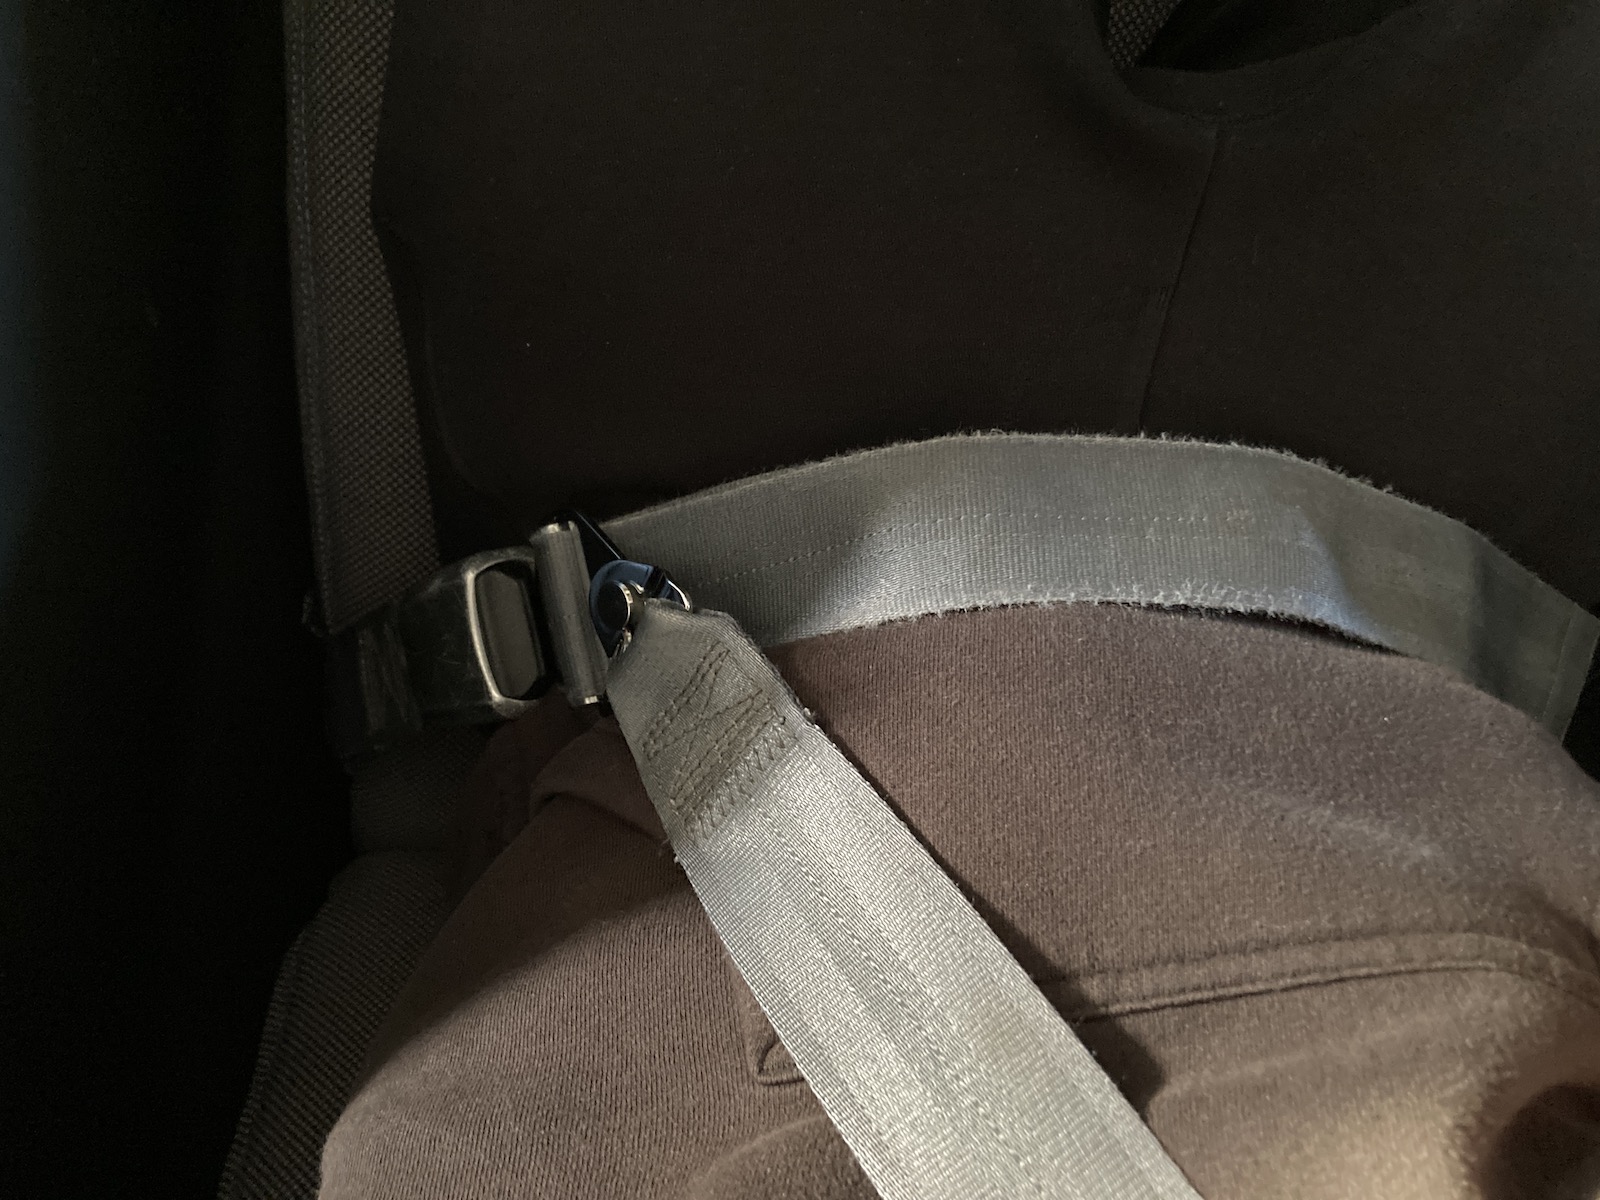 Image of SAS A330 business class seatbelt, part of my review of ARN-ORD flight